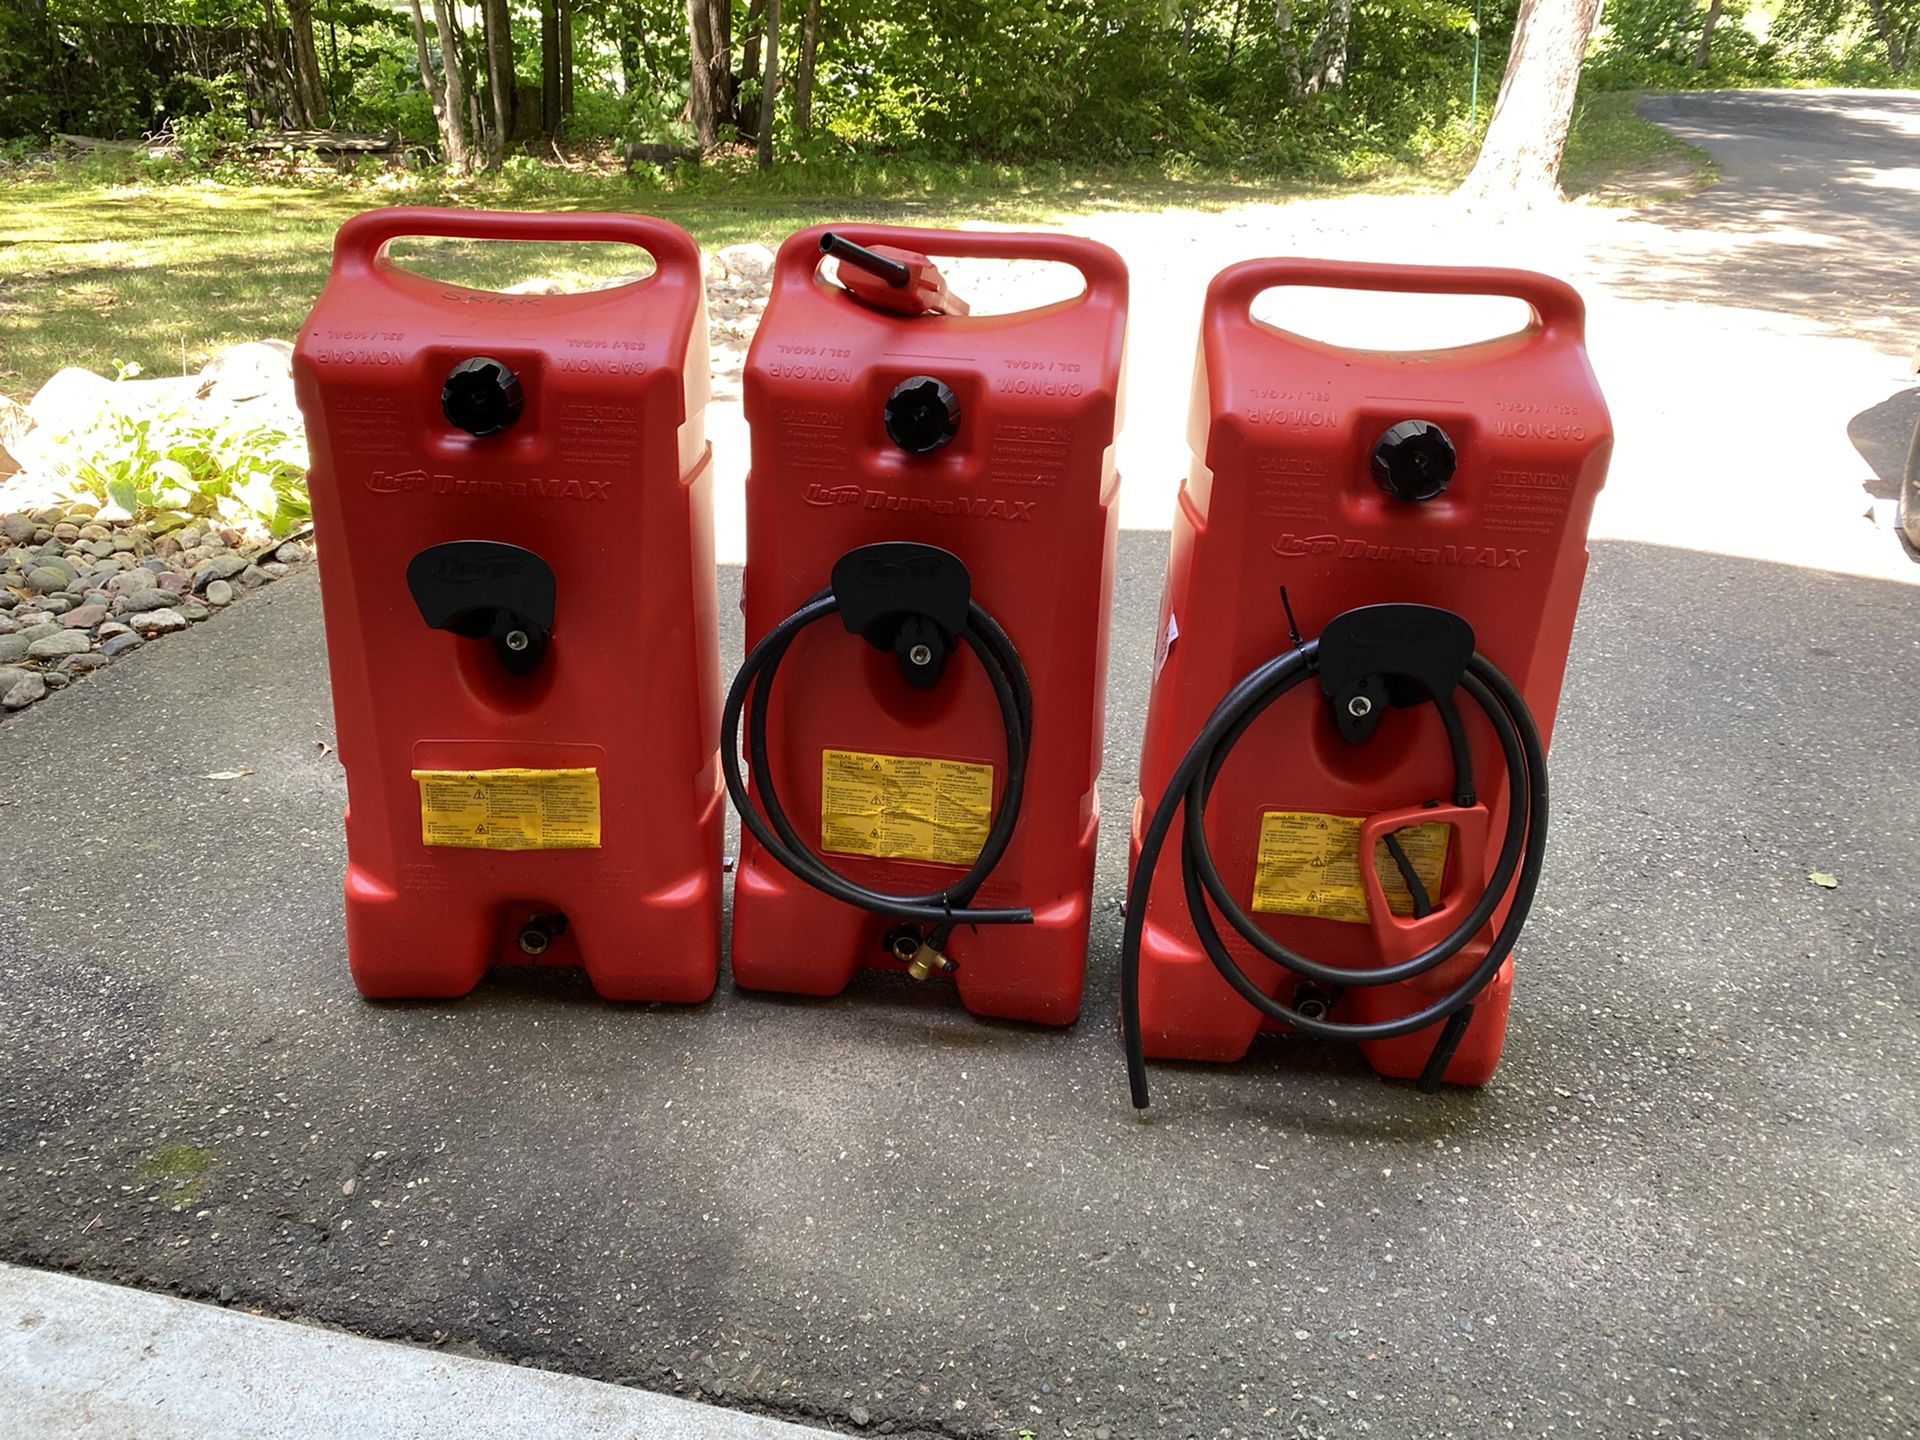 Quantity 3, 14 Gal fuel containers